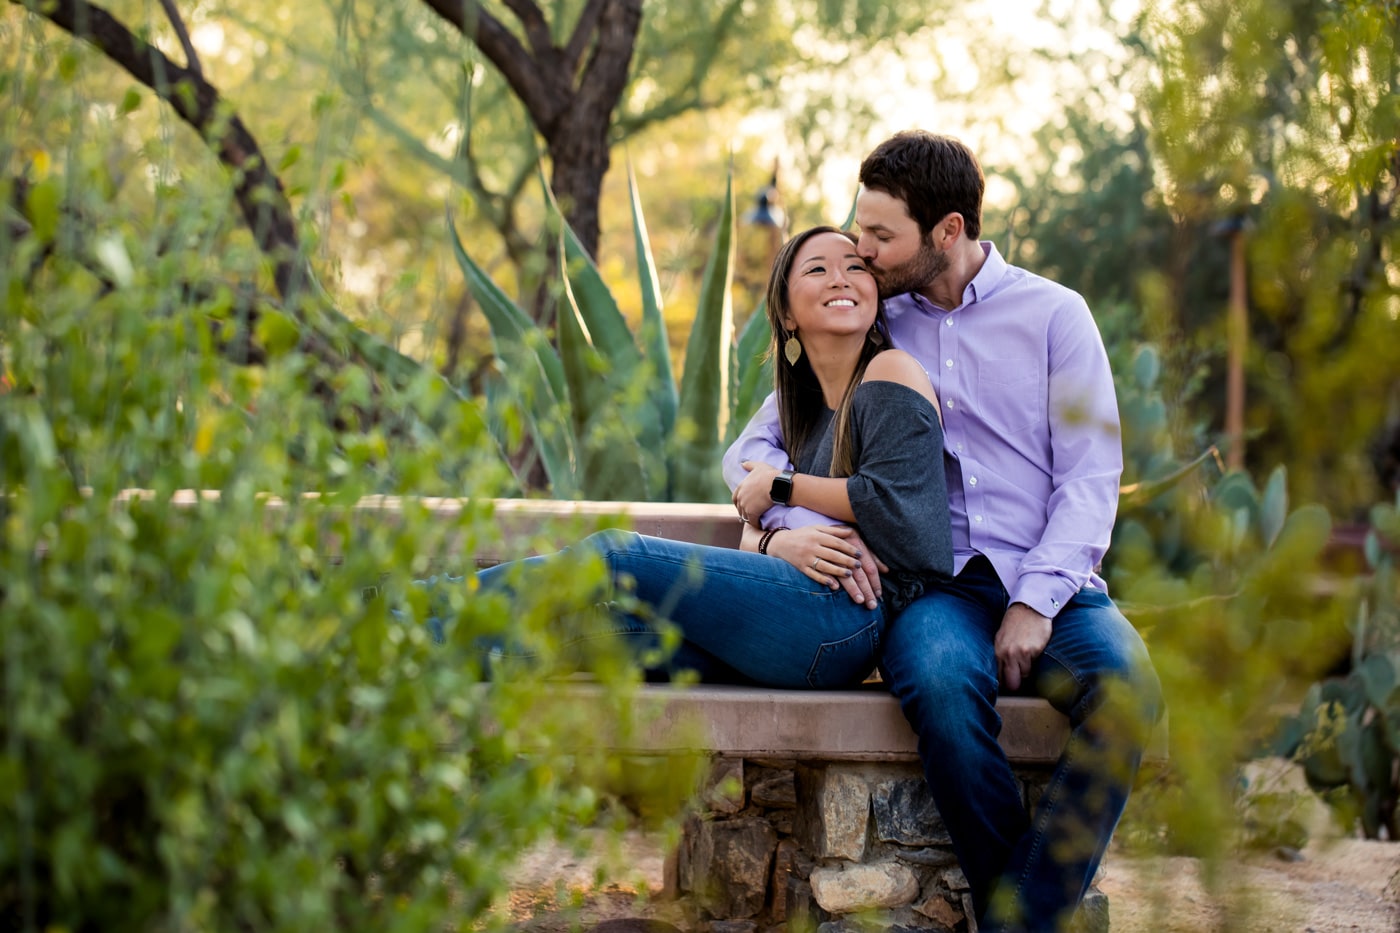 Man kissing woman on cheek sitting on bench with desert plants